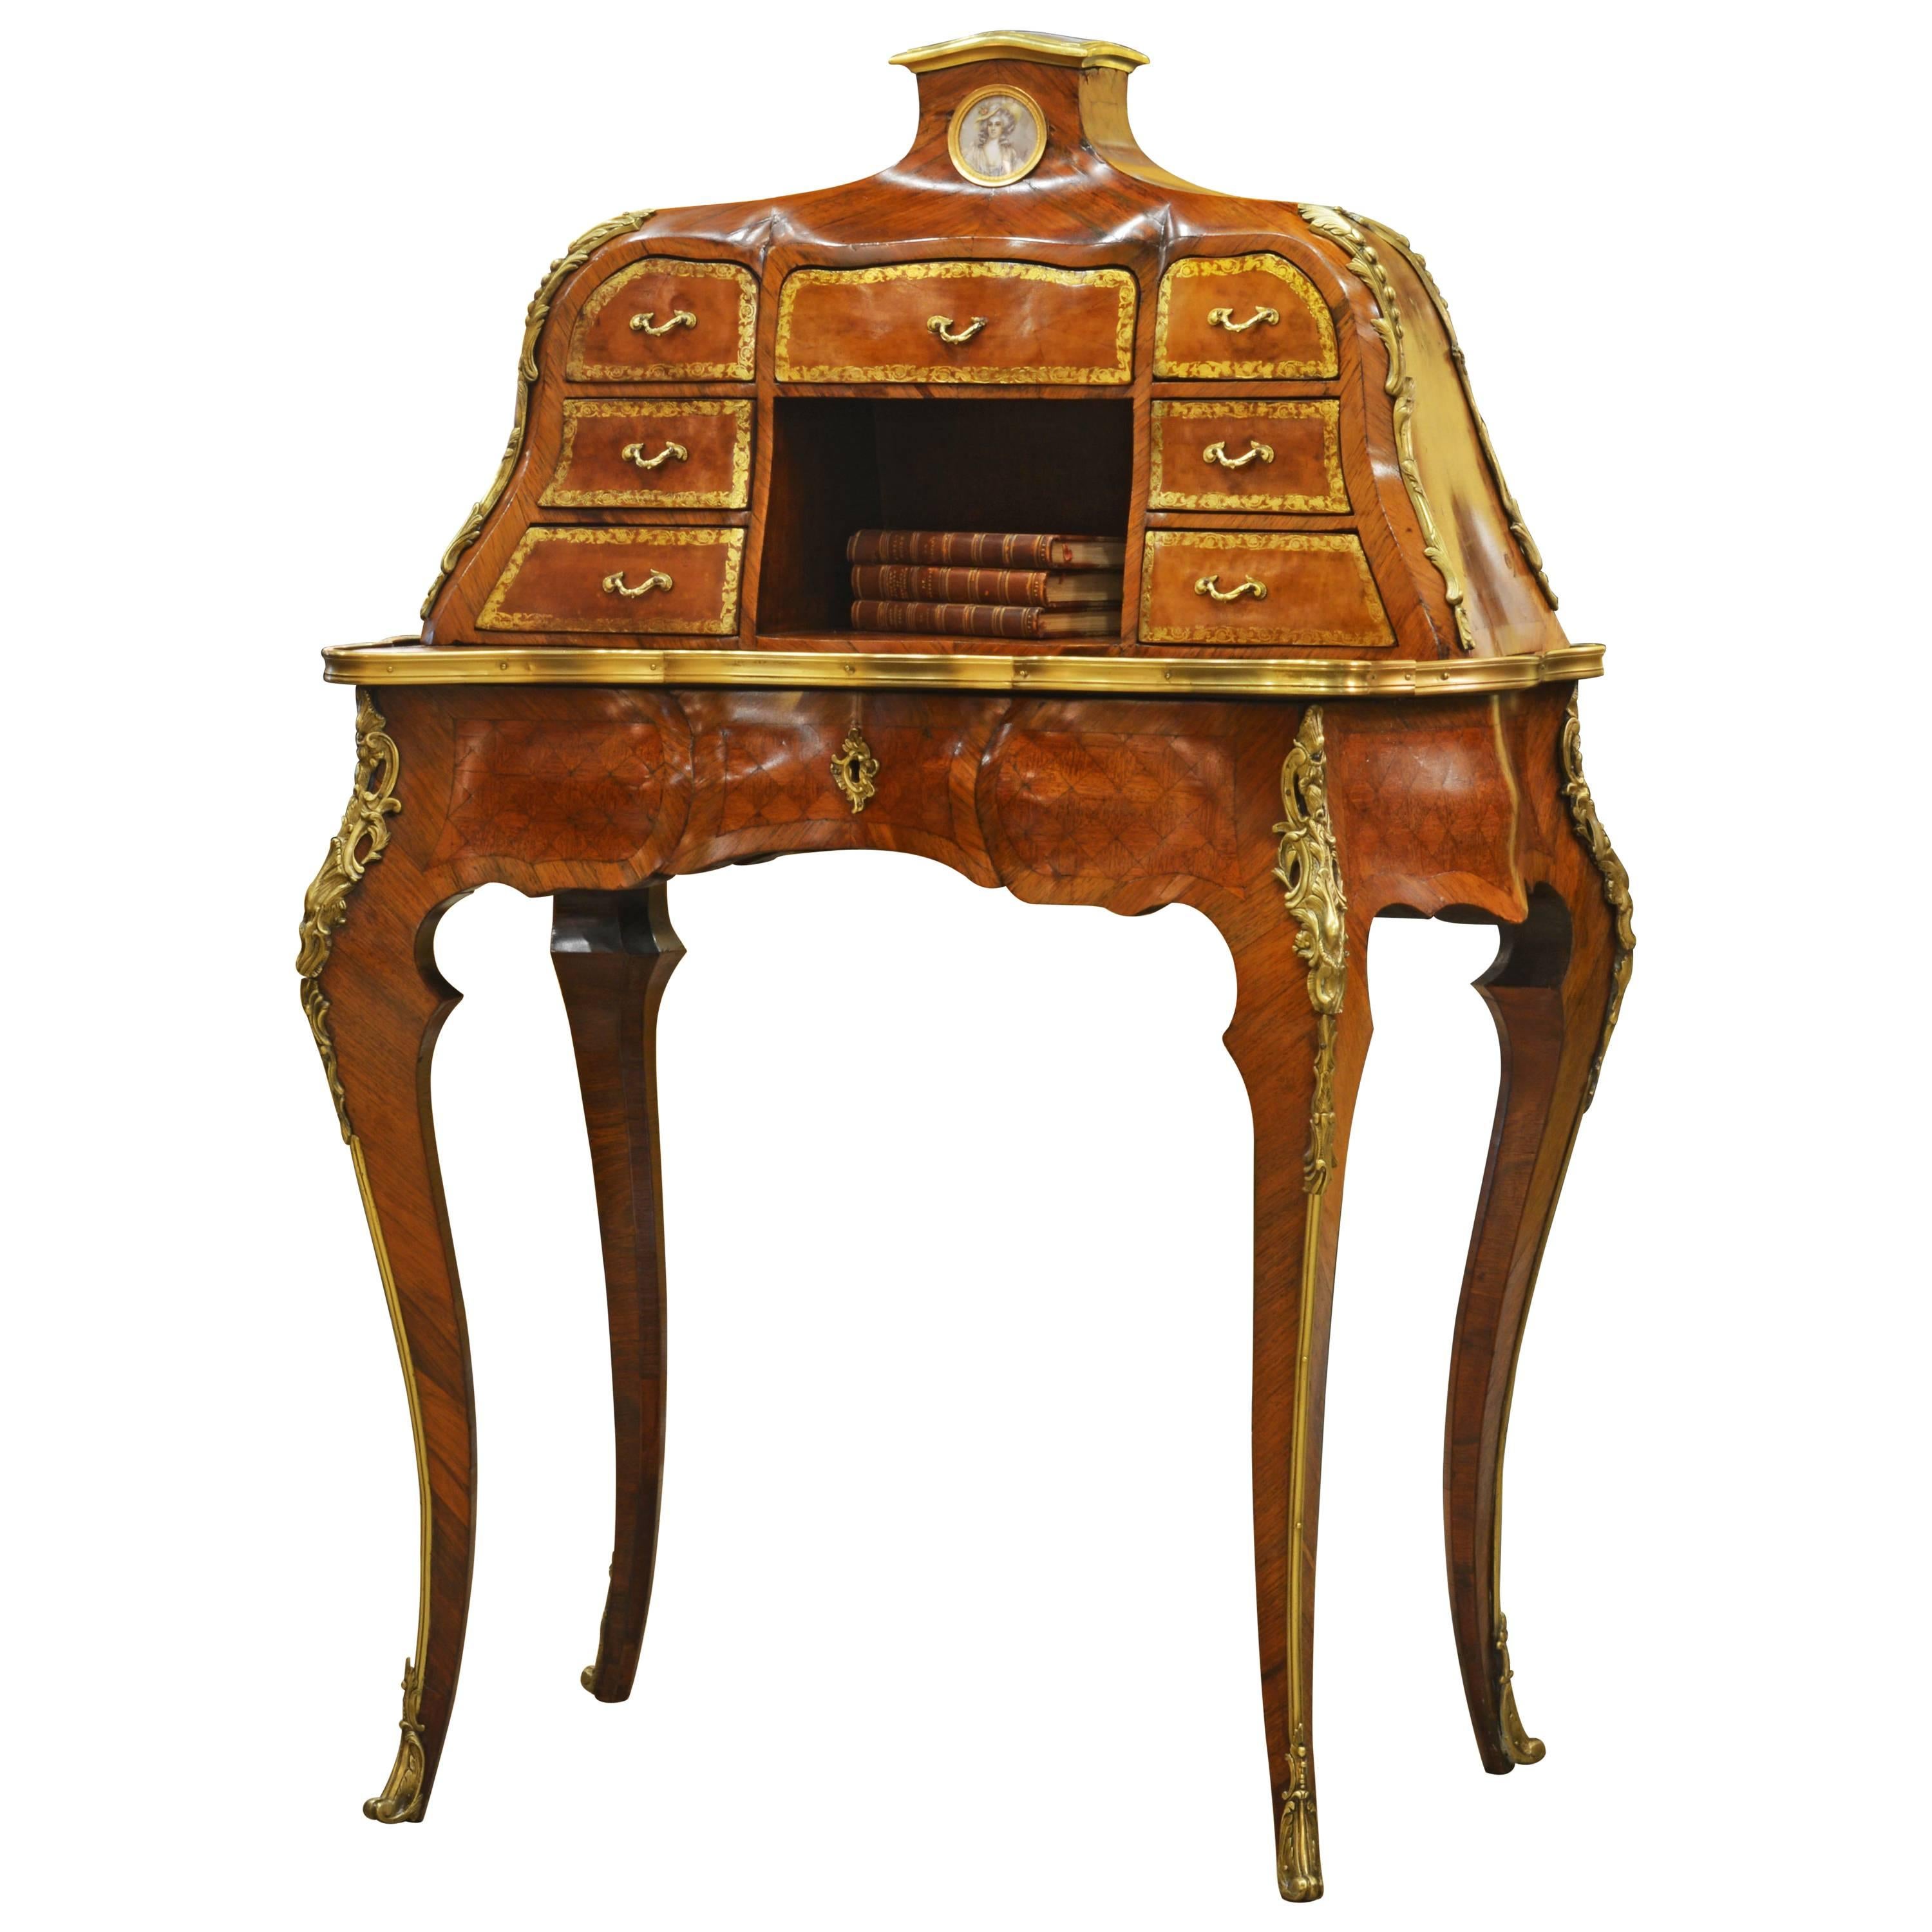 19th Century Louis XV Style Bombe Marquetry and Ormolu-Mounted Bureau a Gradin